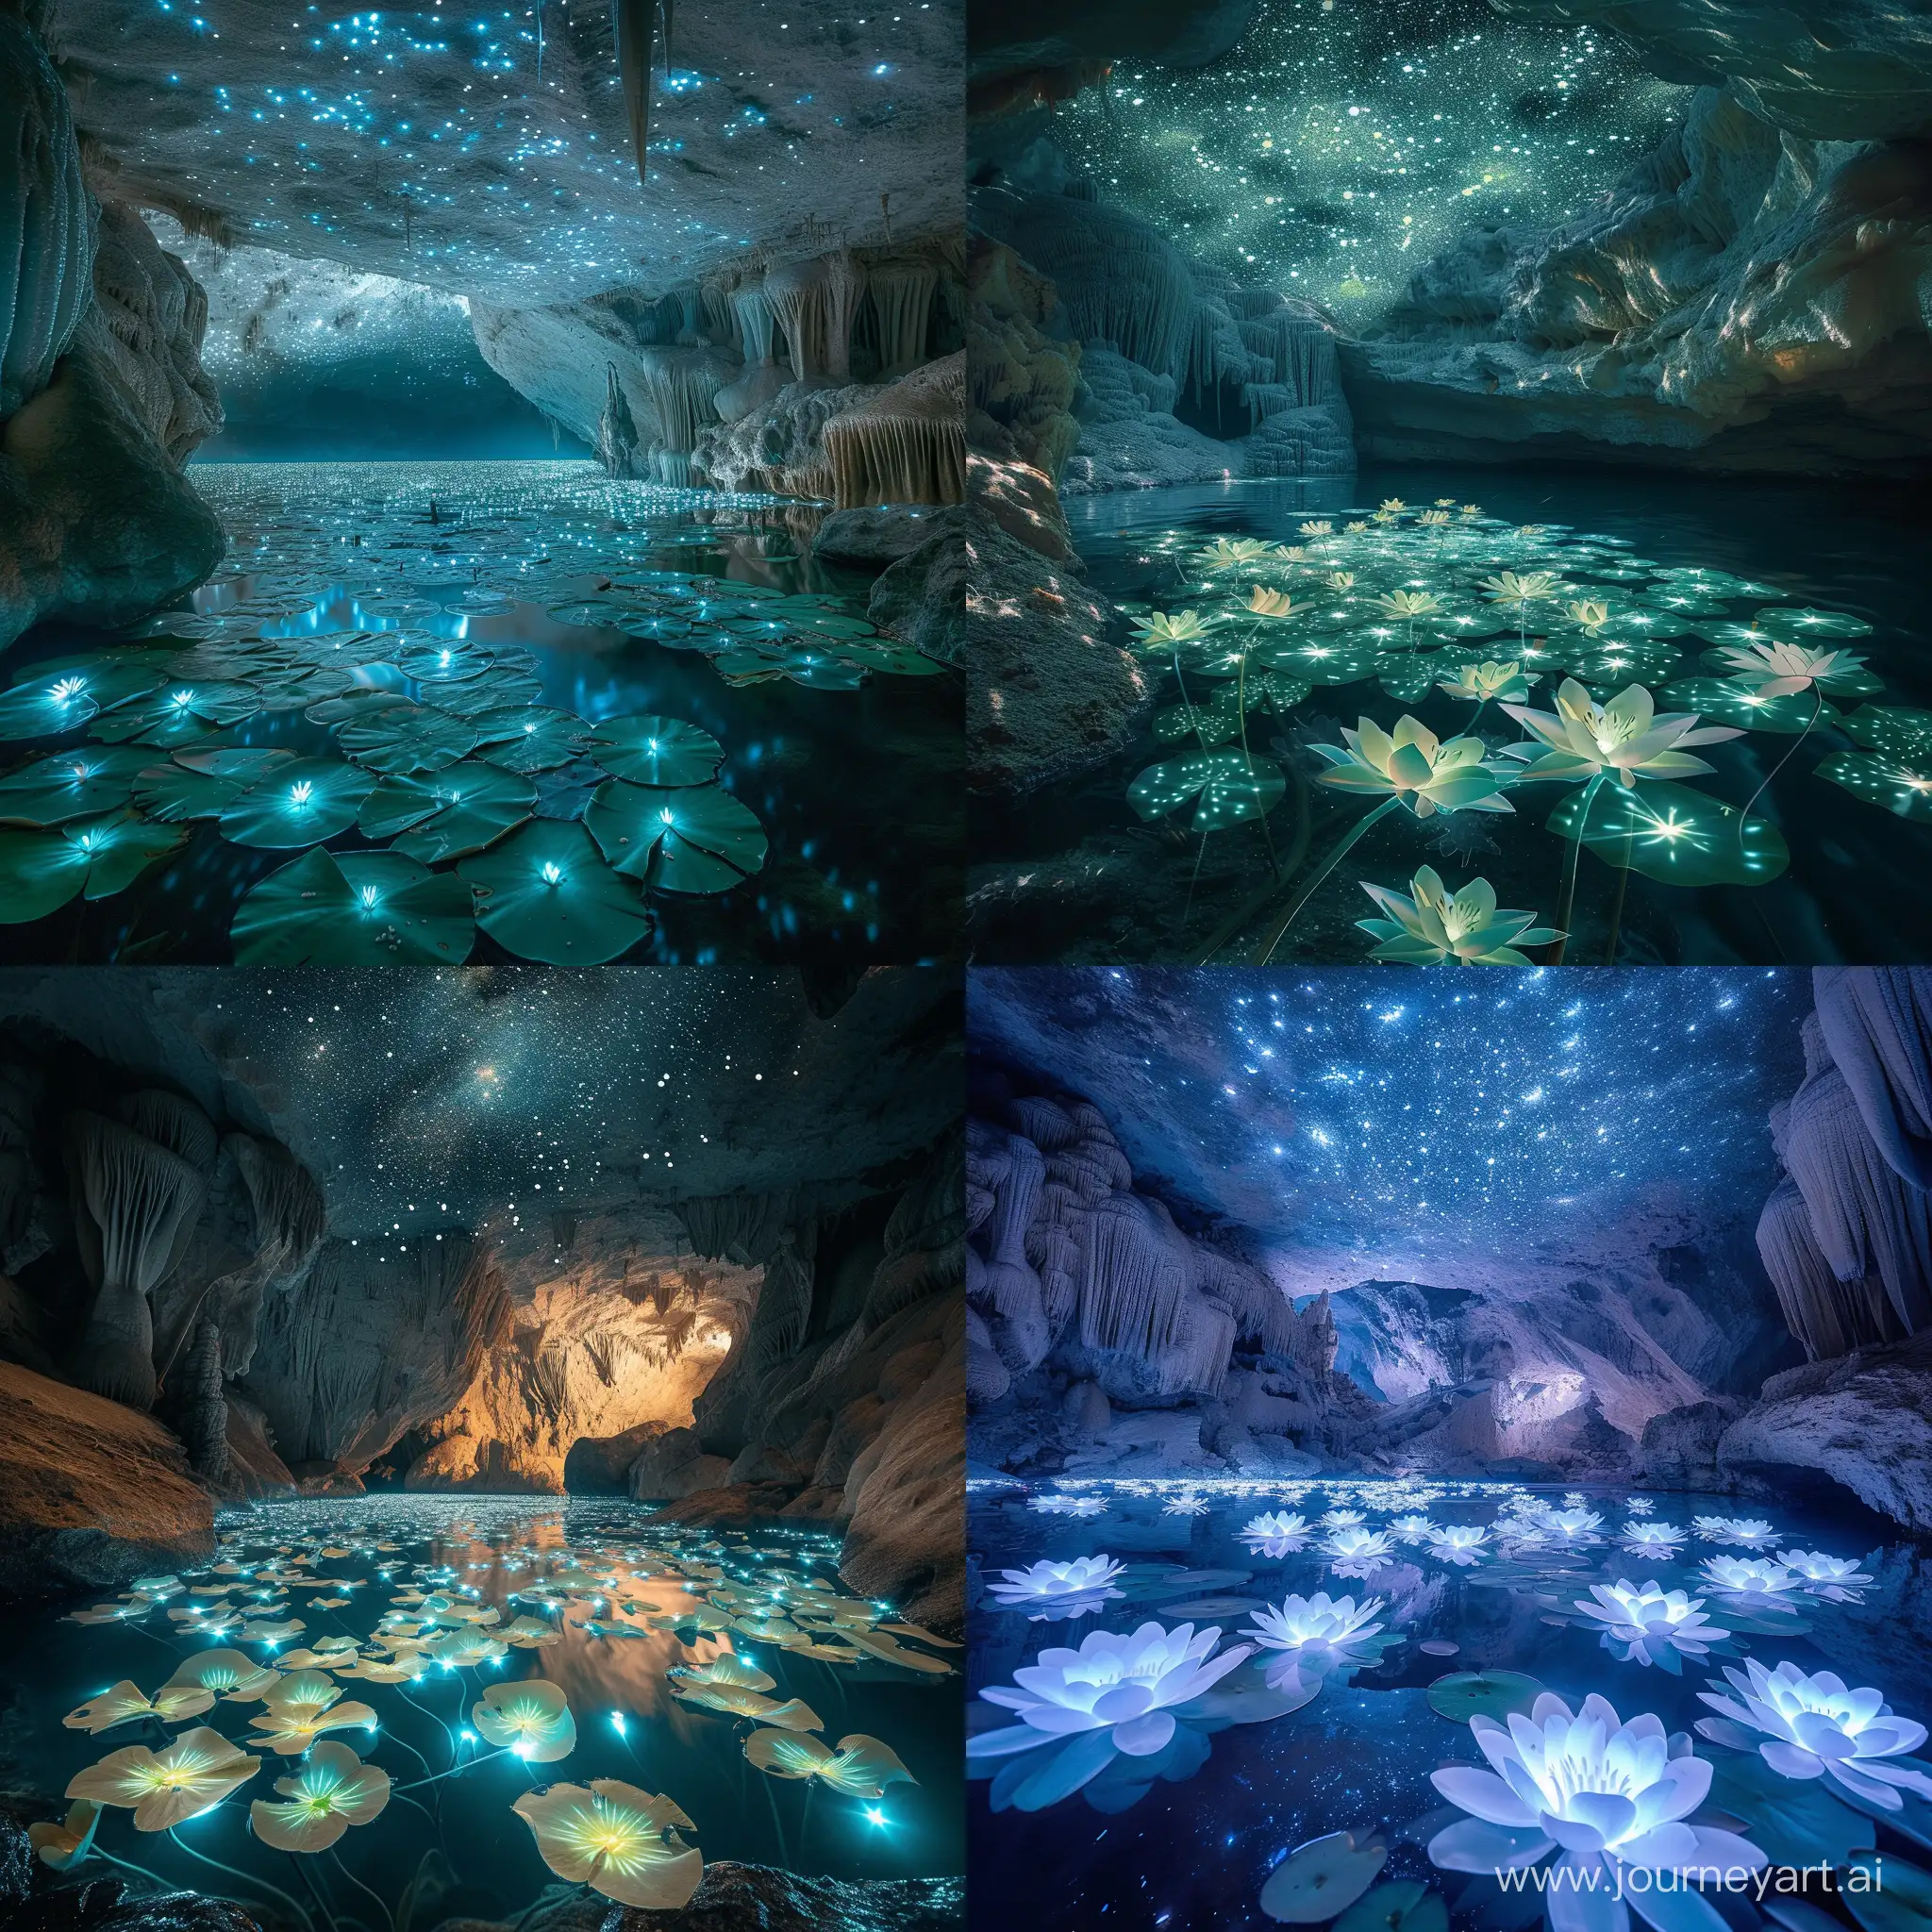 Enchanting-Bioluminescent-Cave-with-Starry-Sky-Ceiling-and-Luminous-Water-Lilies